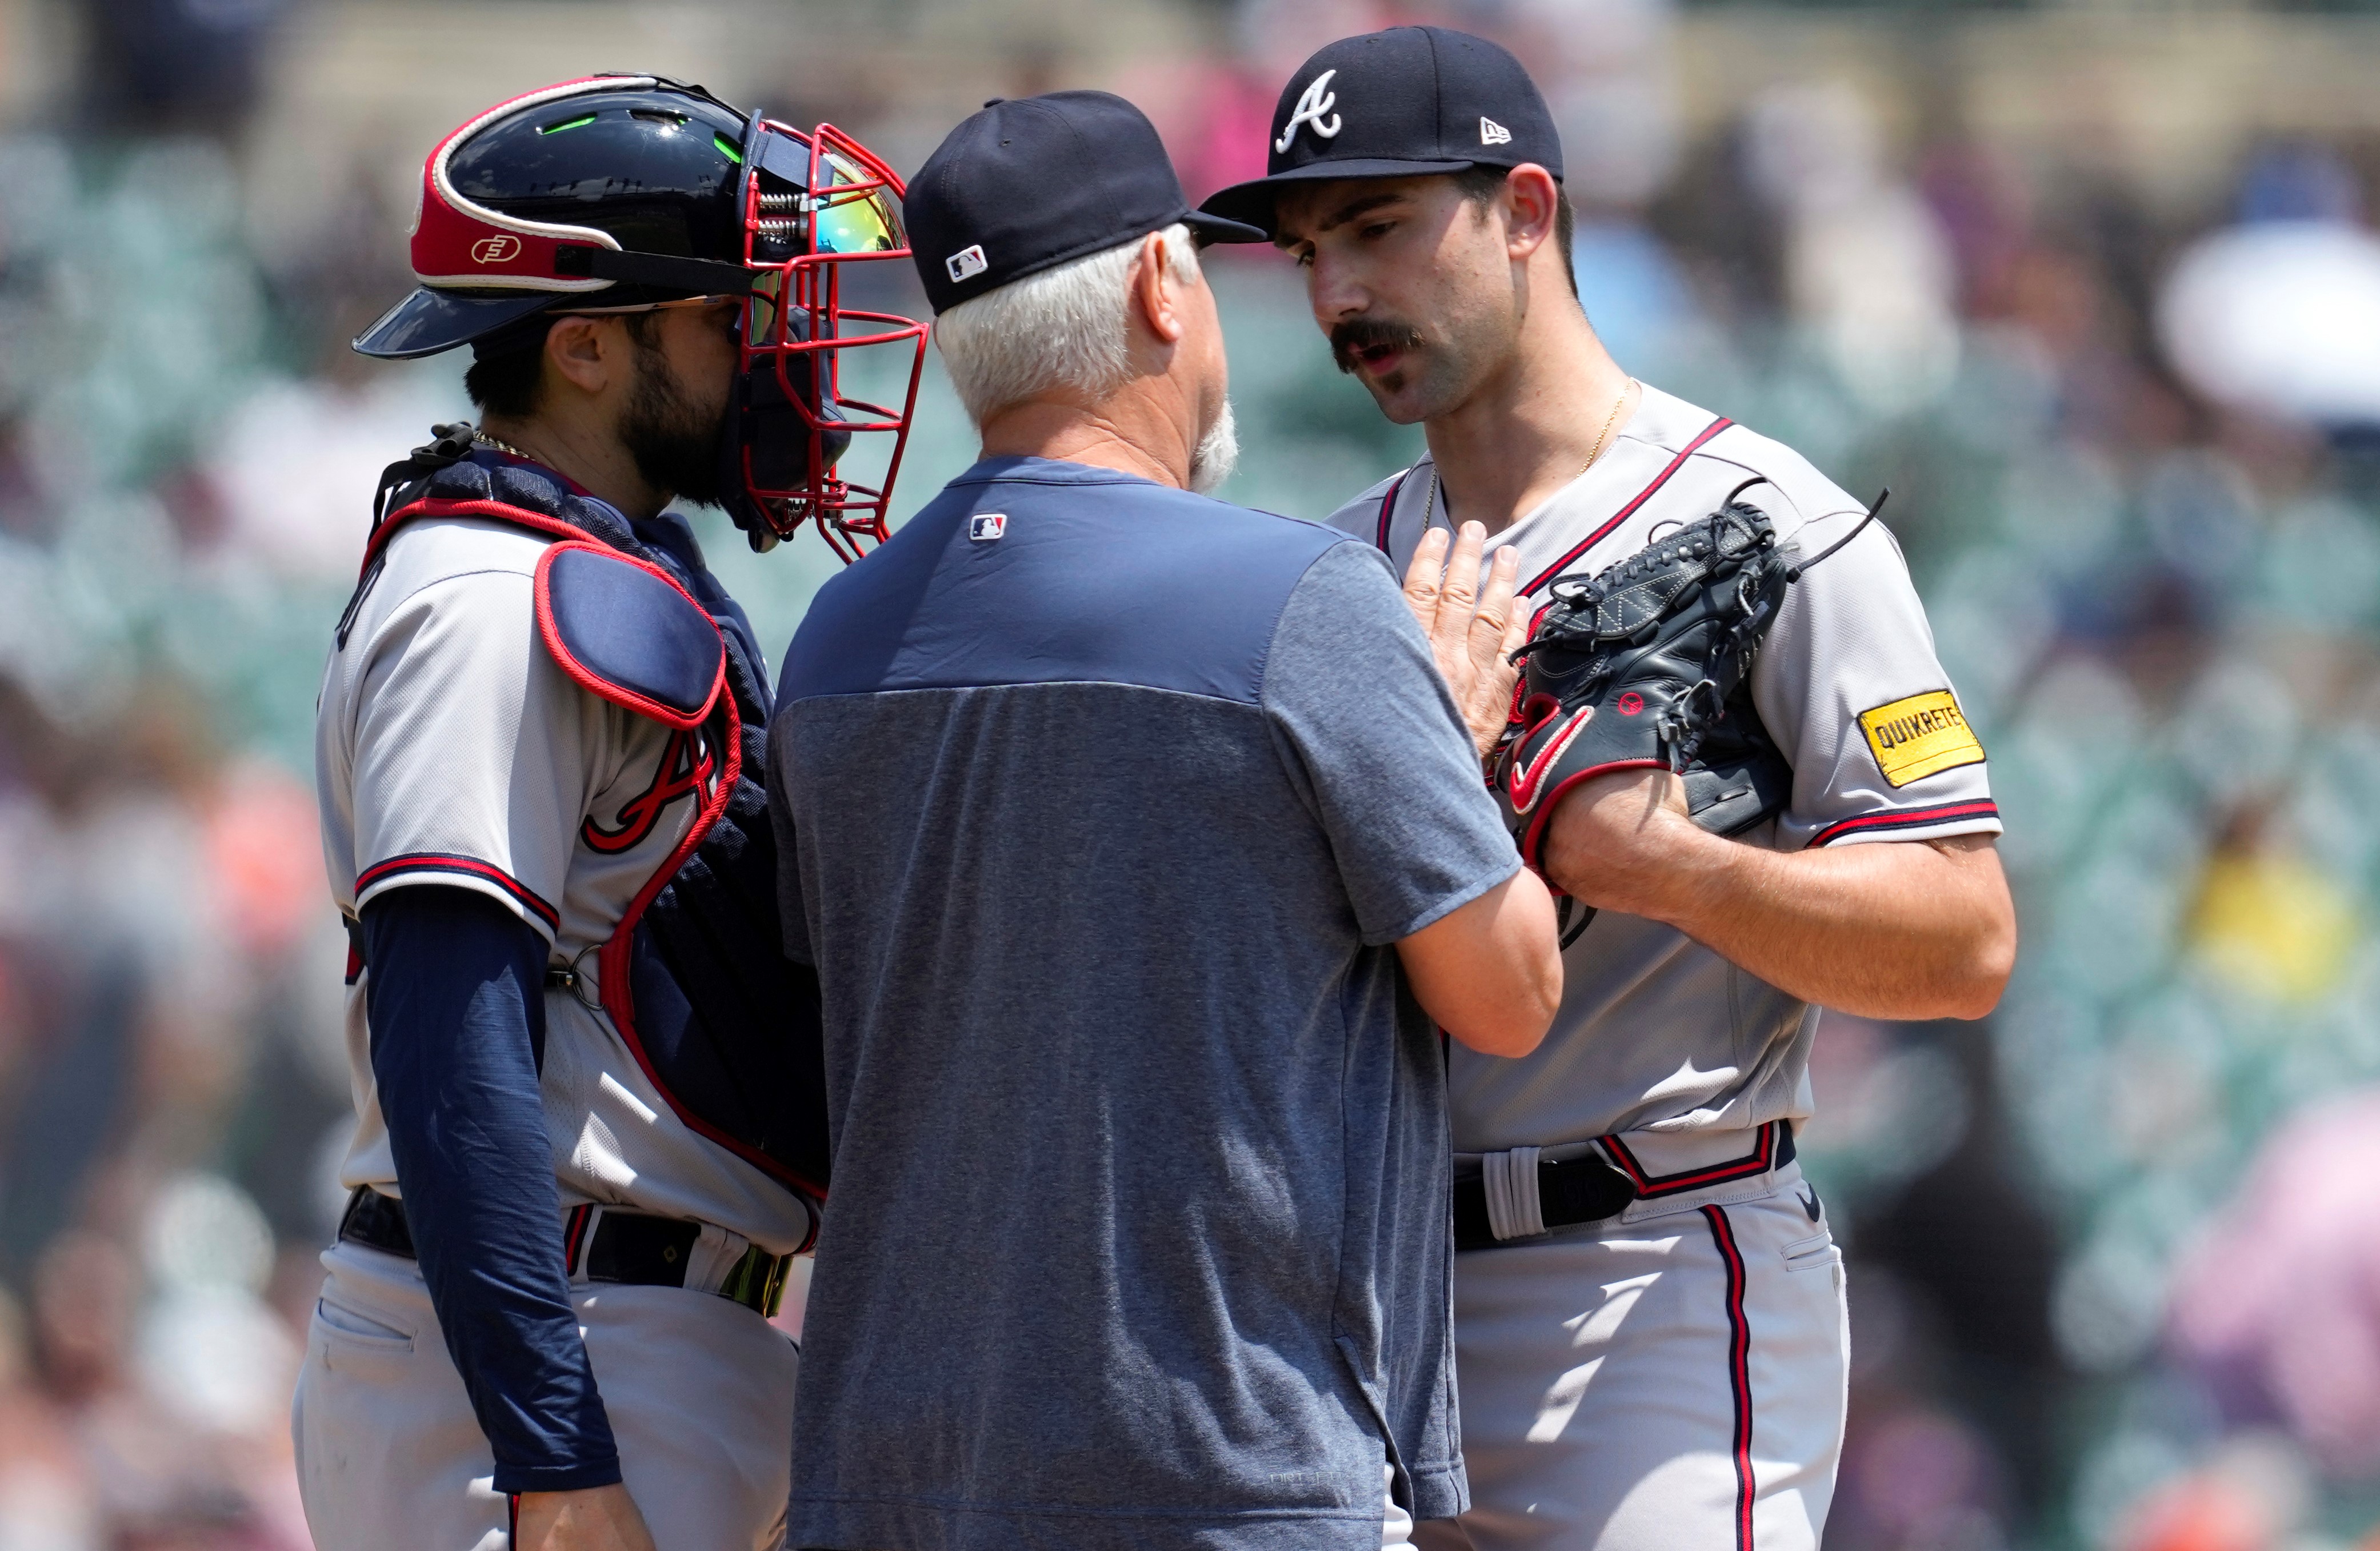 Rosario homer leads Braves to sweep Tigers in doubleheader South